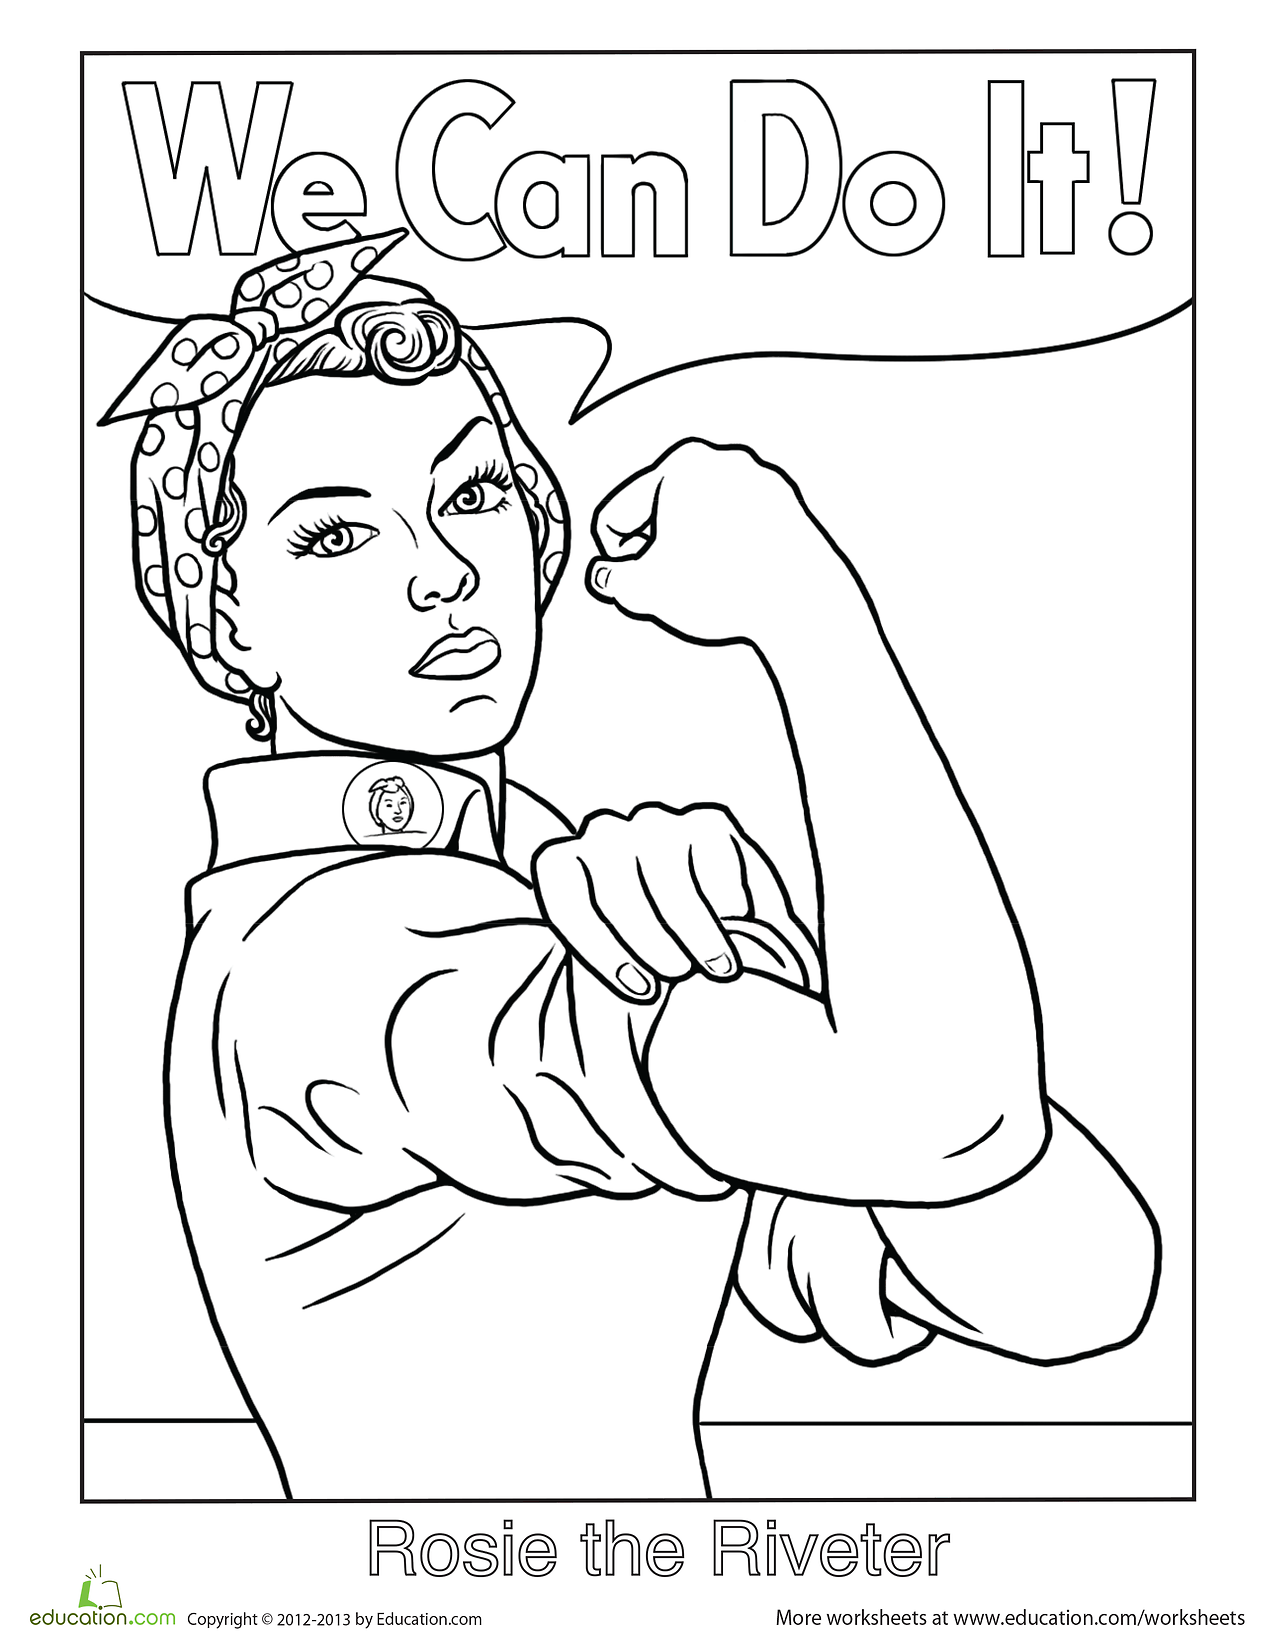 rosie-the-riveter-we-can-do-it-coloring-pages-printable